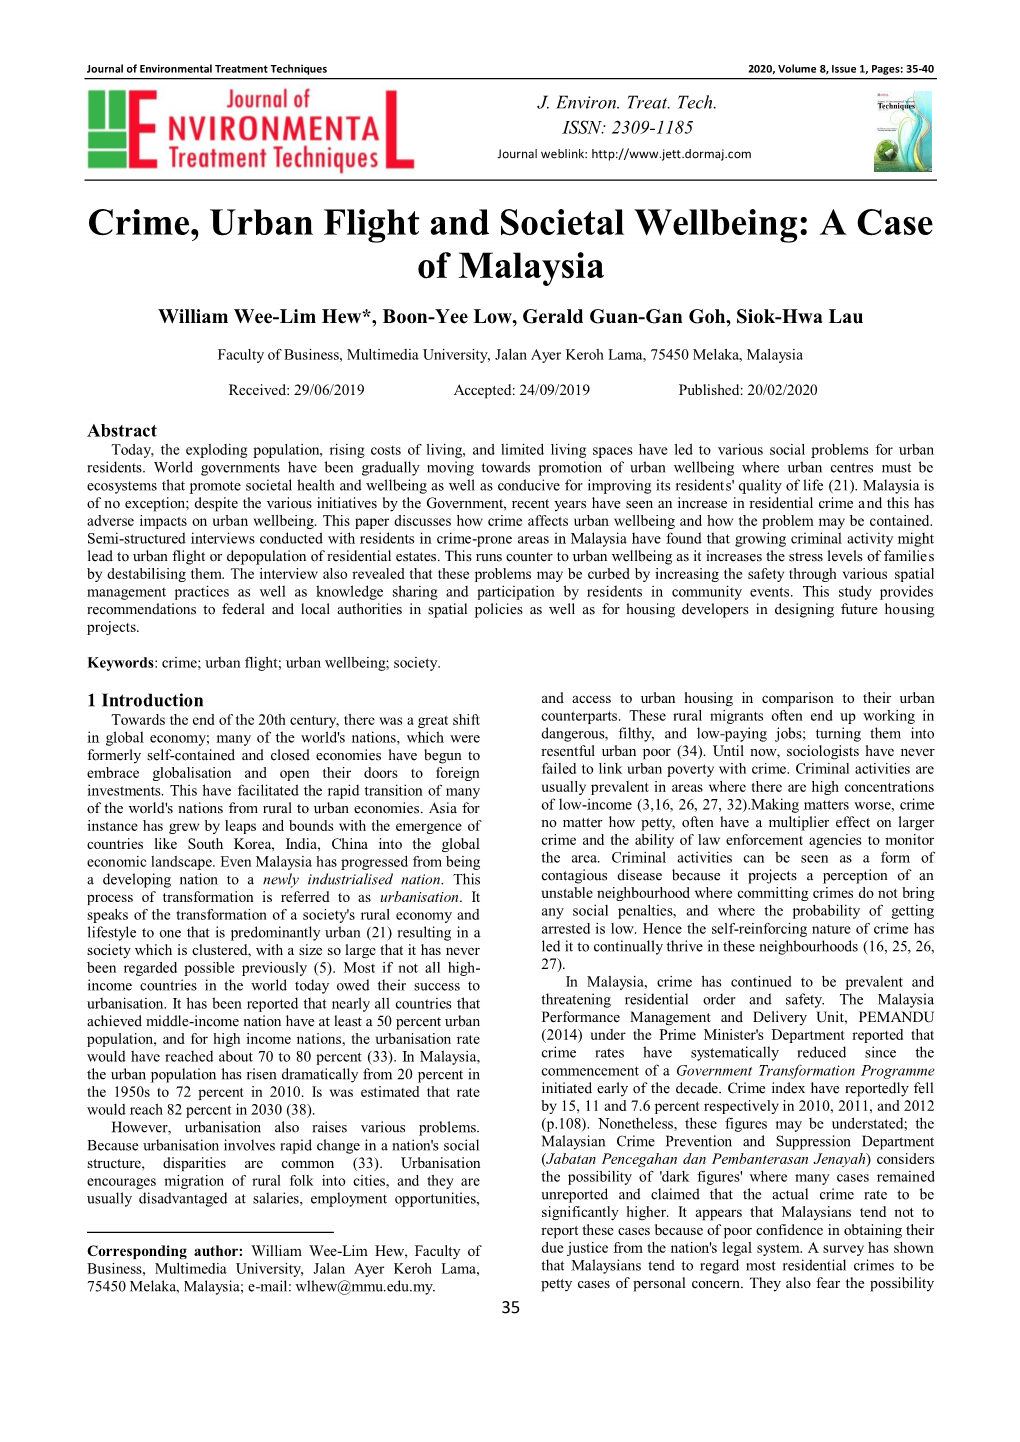 Crime, Urban Flight and Societal Wellbeing: a Case of Malaysia